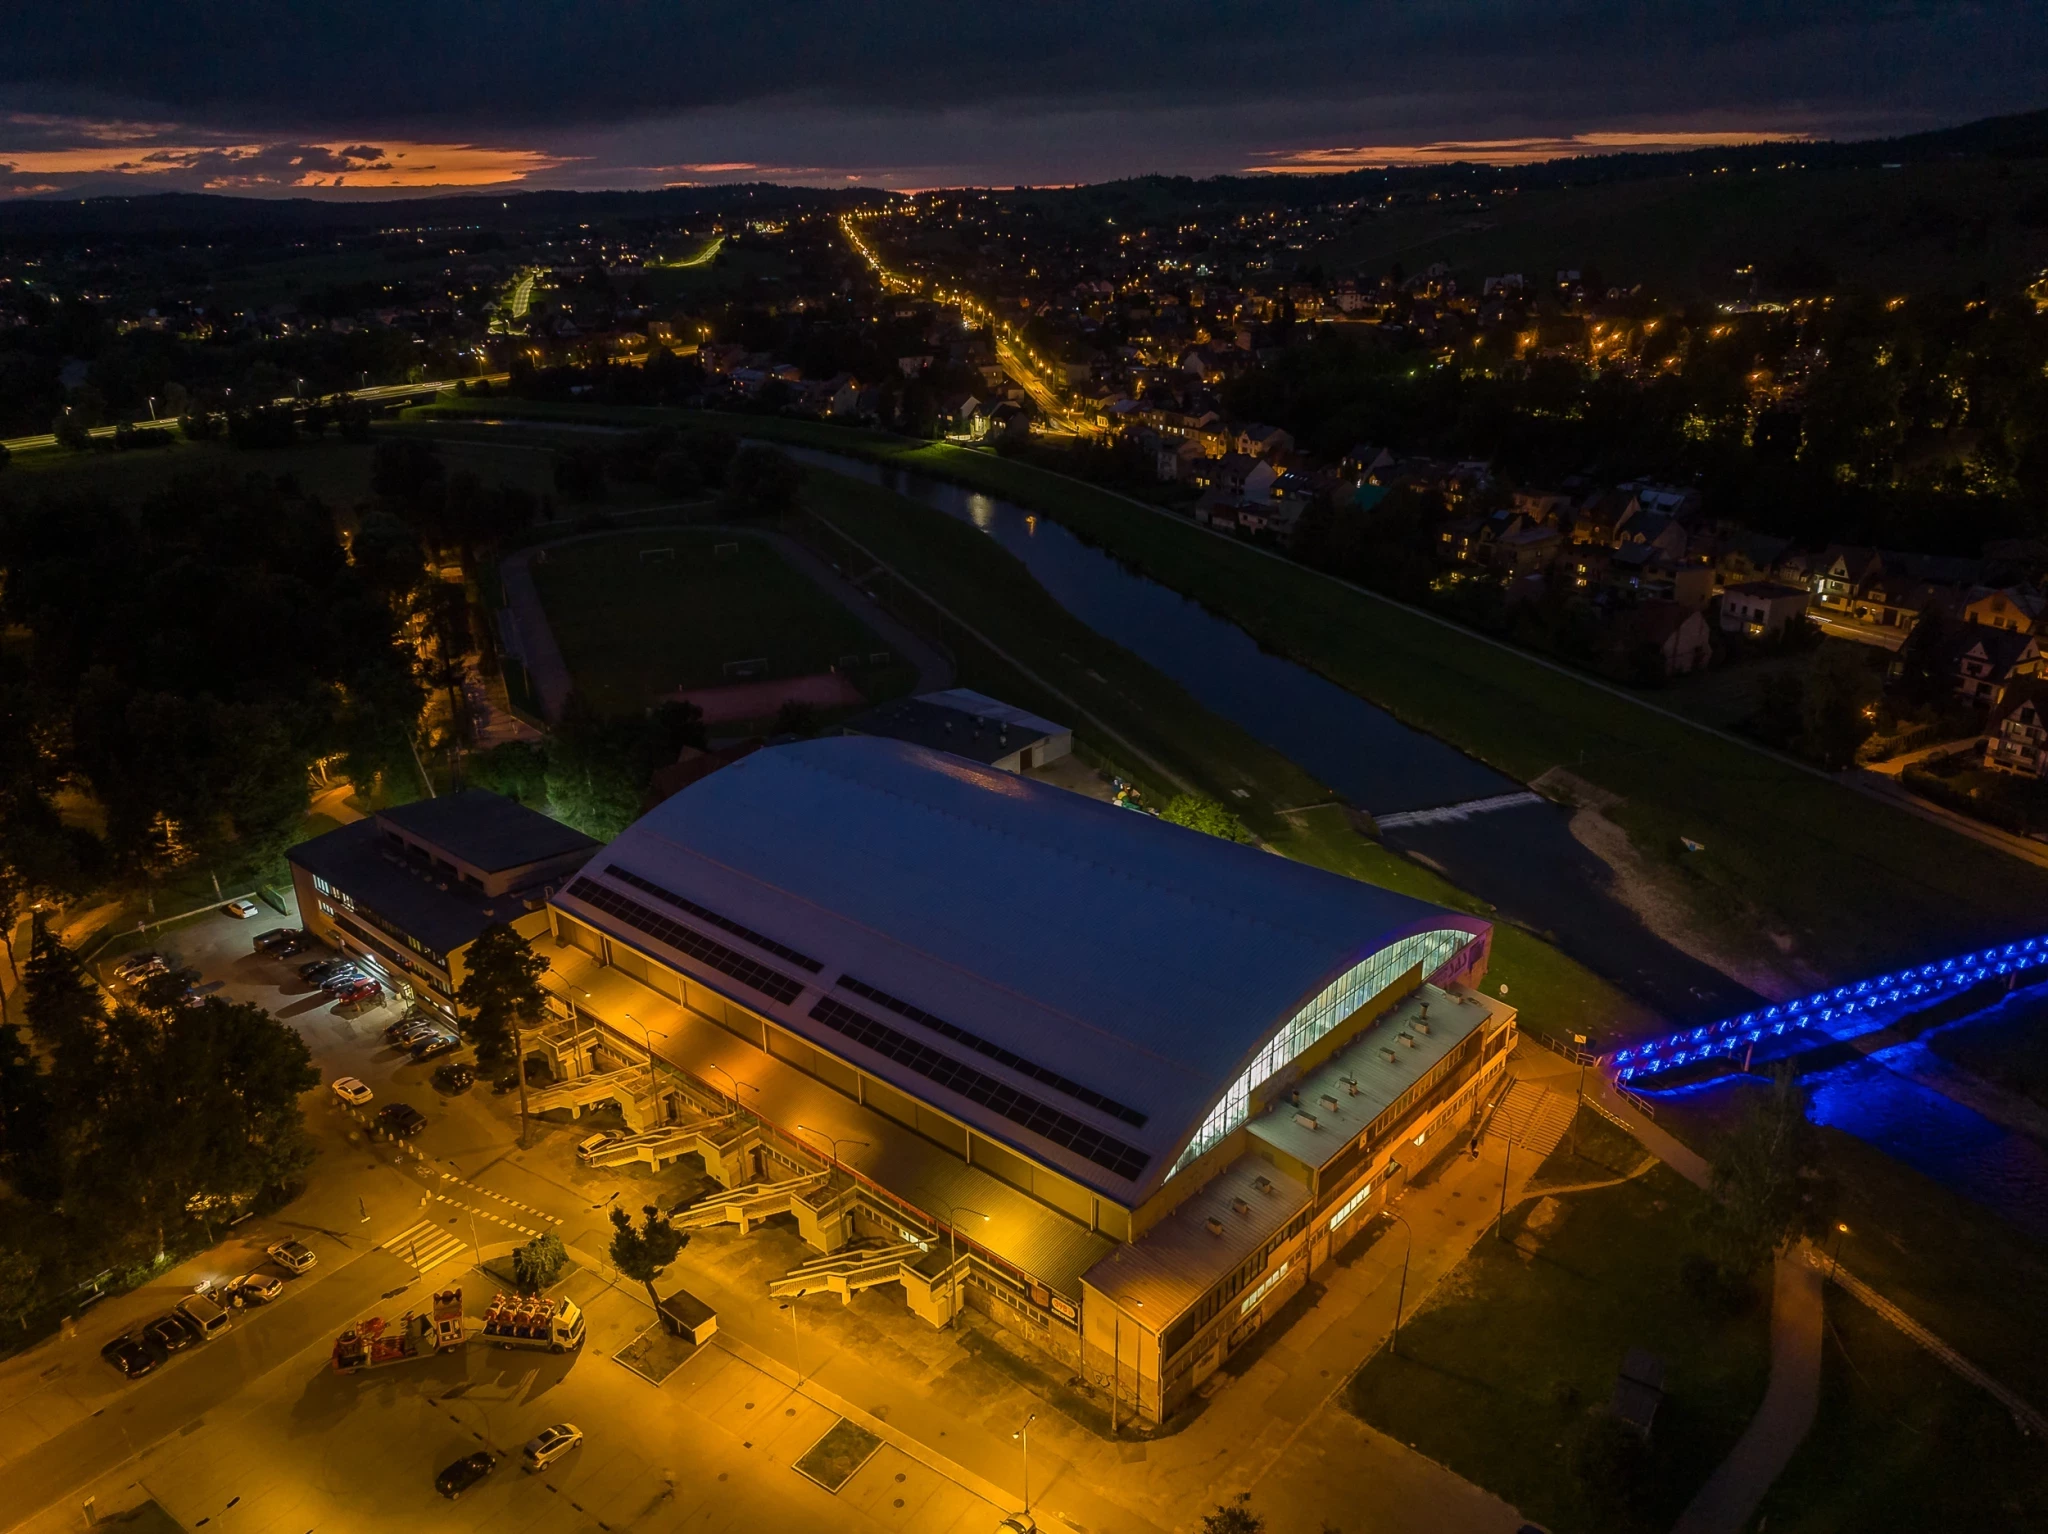 The Nowy Targ Arena is set to host boxing competitions at the 2023 European Games from June 23 to July 2 ©Kraków-Małopolska 2023 European Games